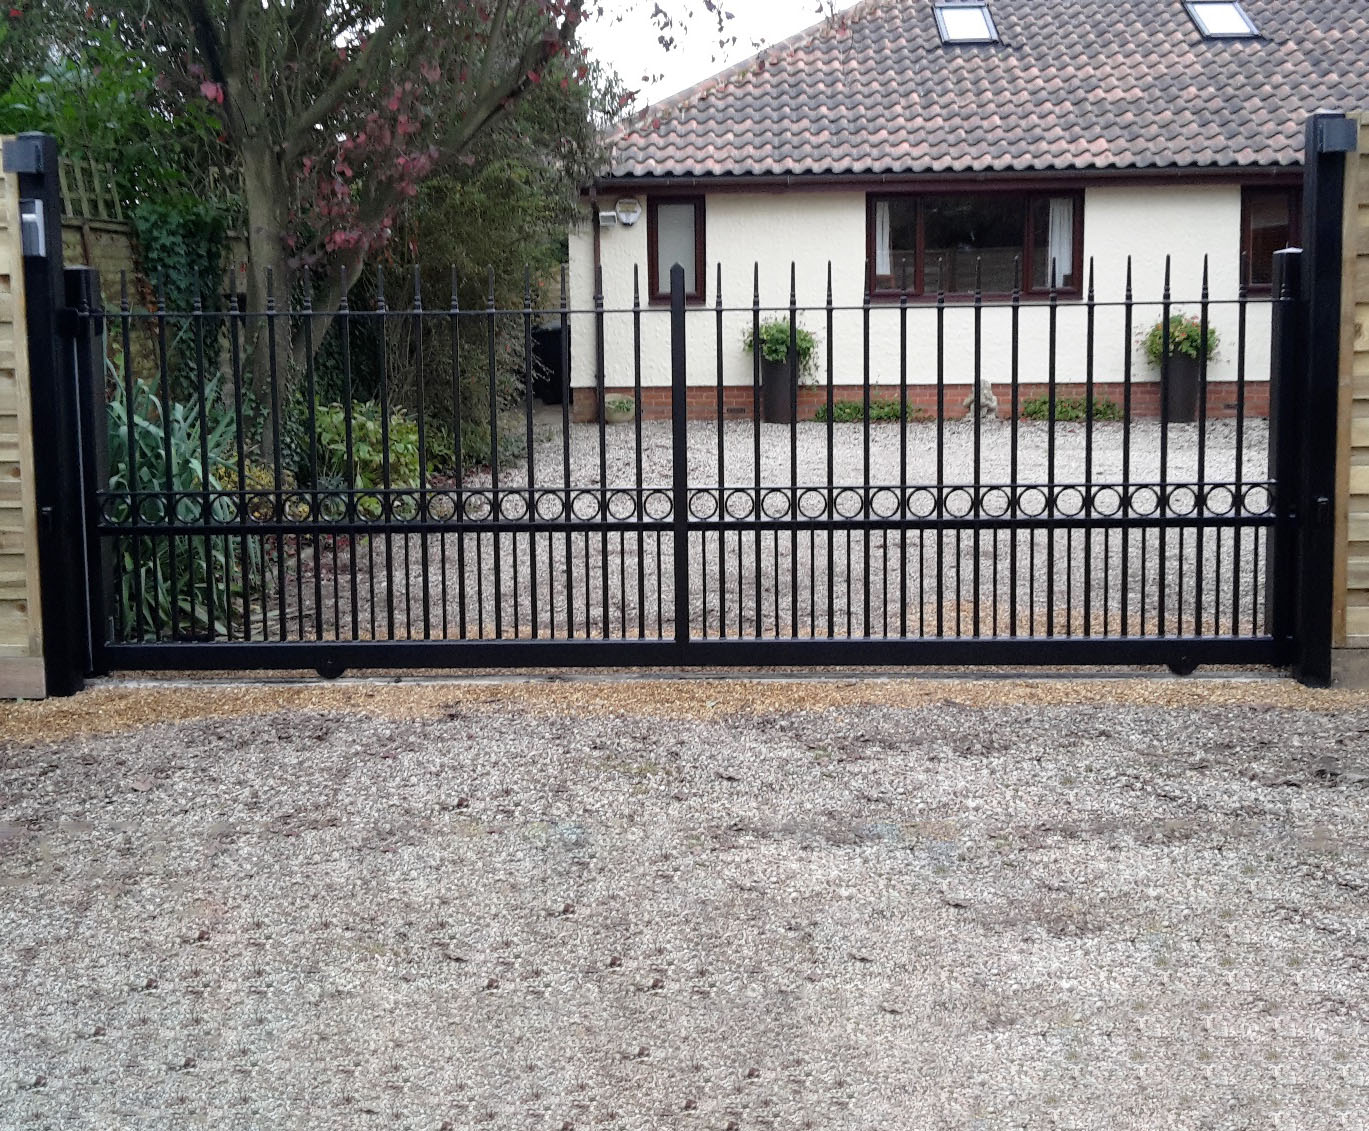 Automatic Newmarket Design Tracked Sliding Gate Bft Ares System with full safety Installed Henham, Essex November 2015